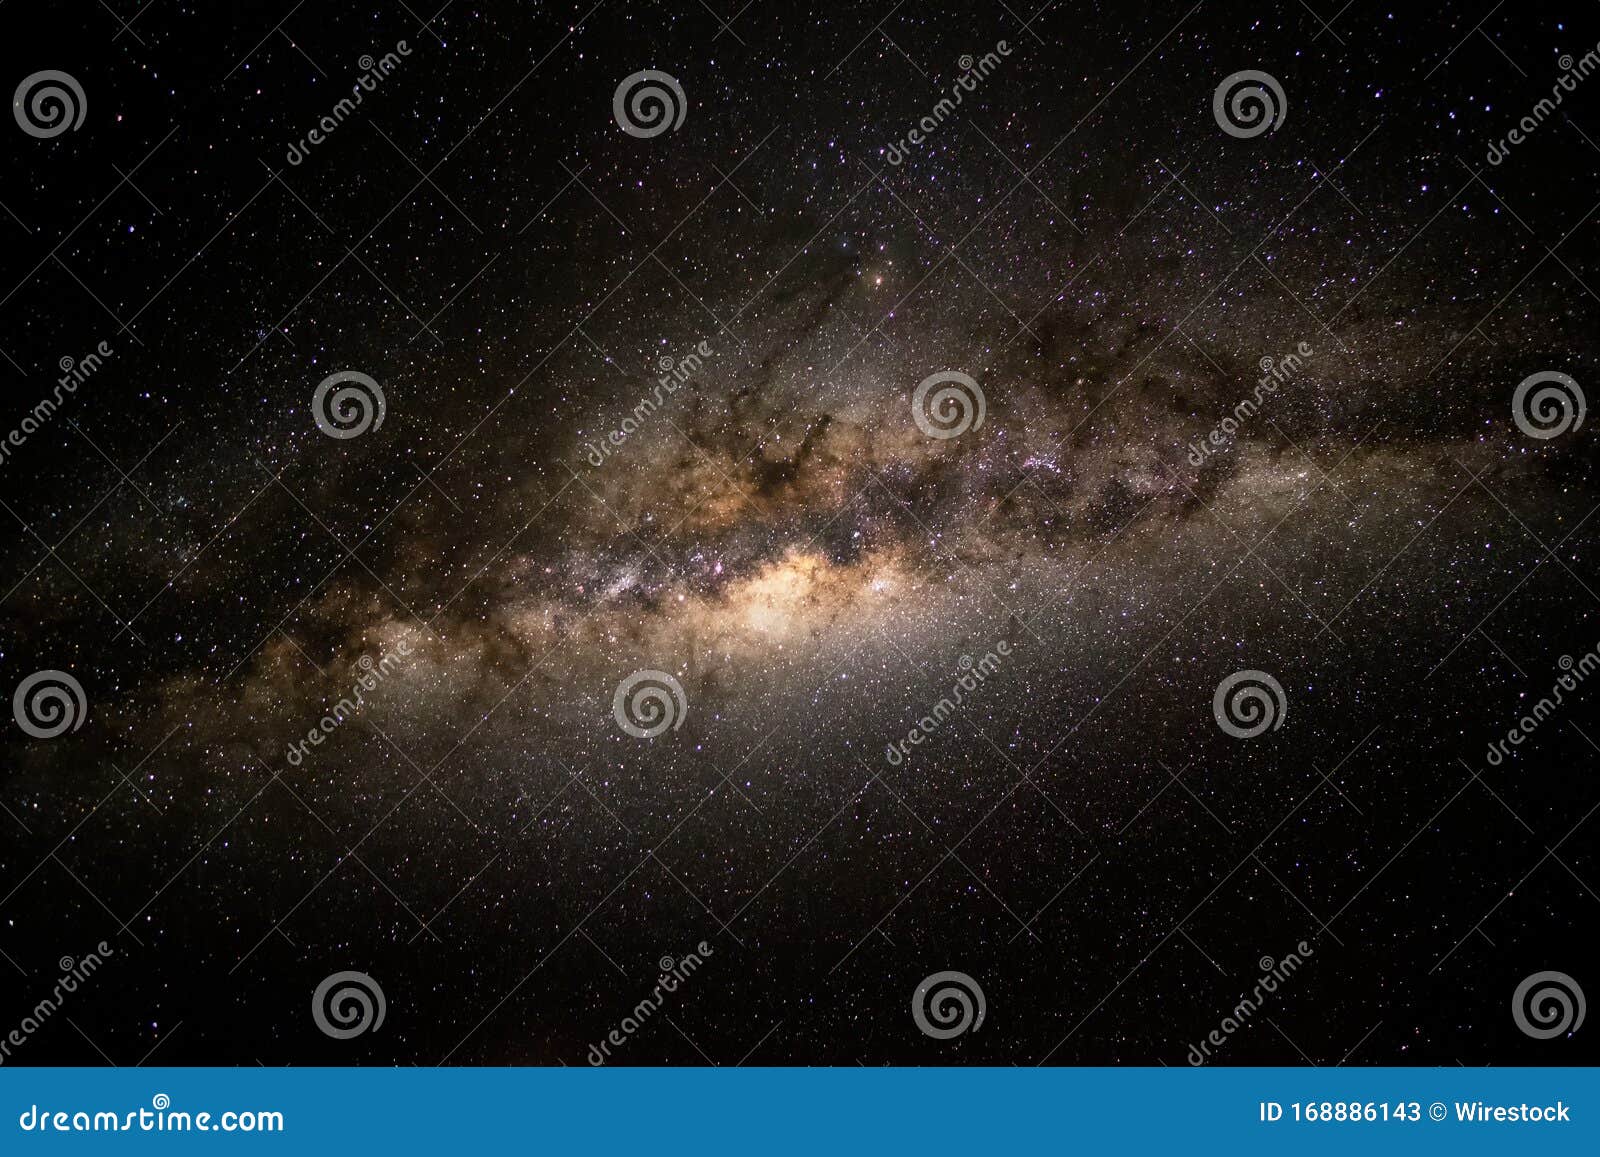 Amazing Shot Of The Milky Way Galaxy Great For A Cool Background